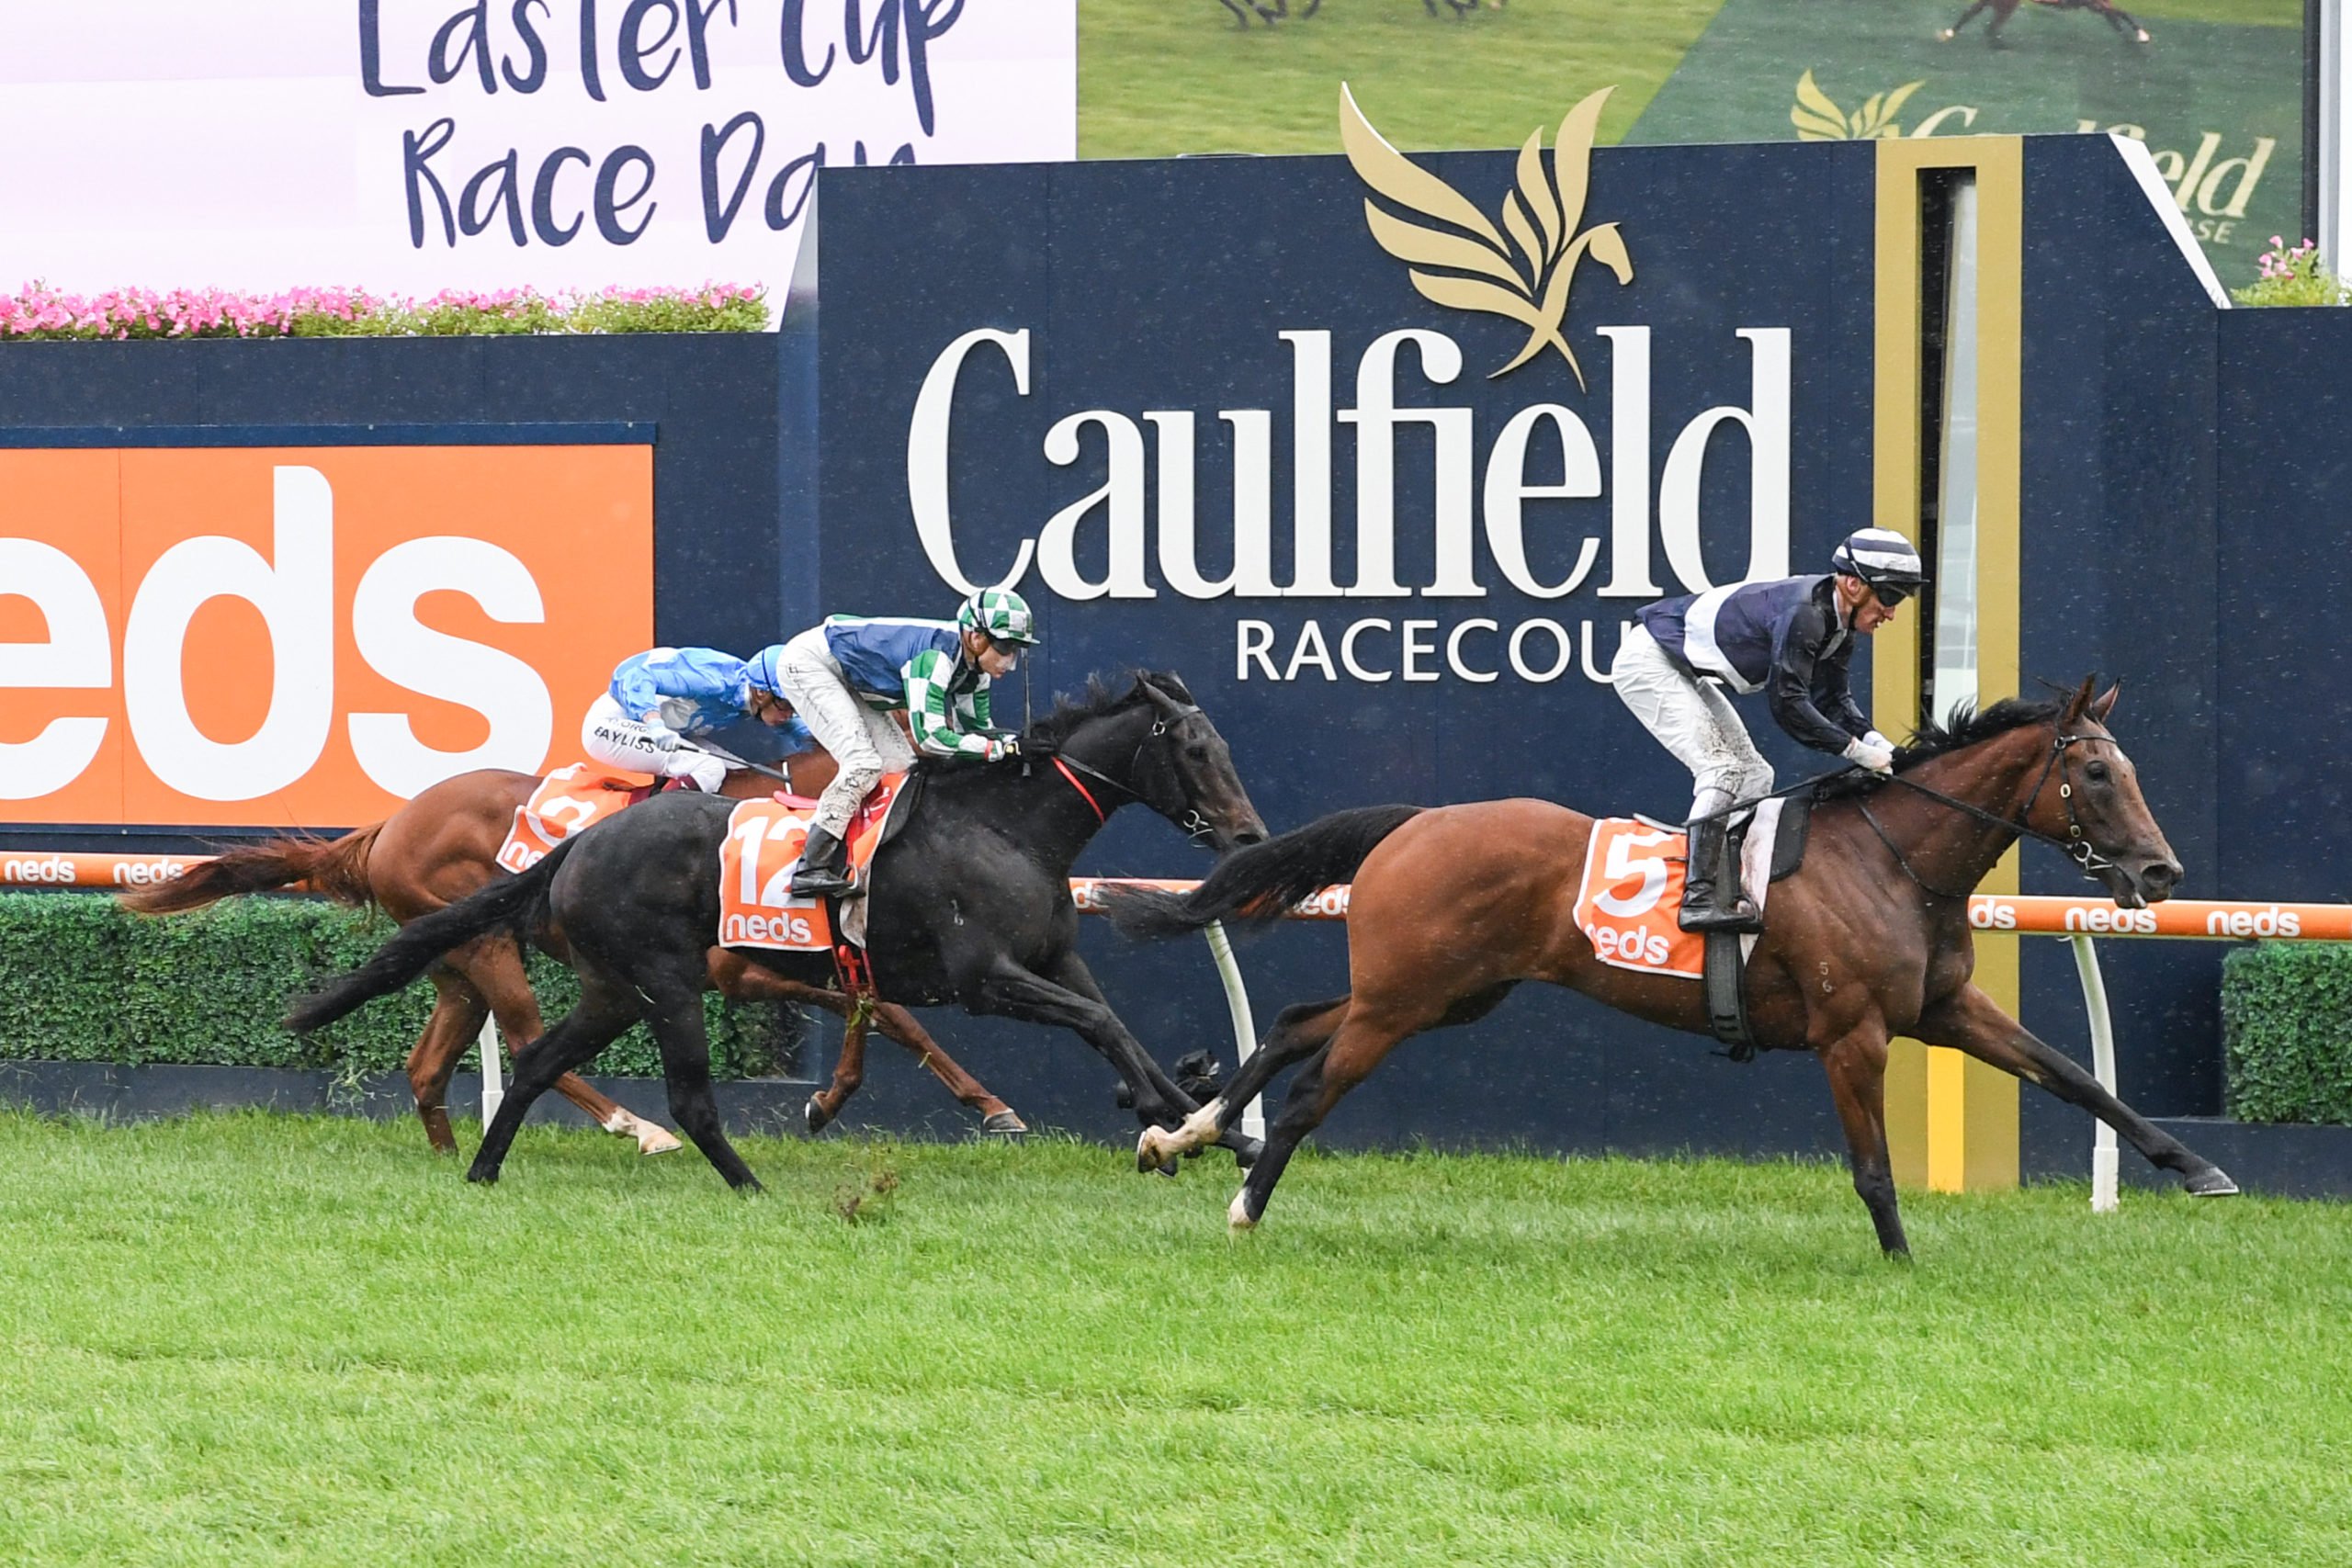 Caulfield Horse Racing Tips & Best Bets, Easter Cup day Saturday 3rd